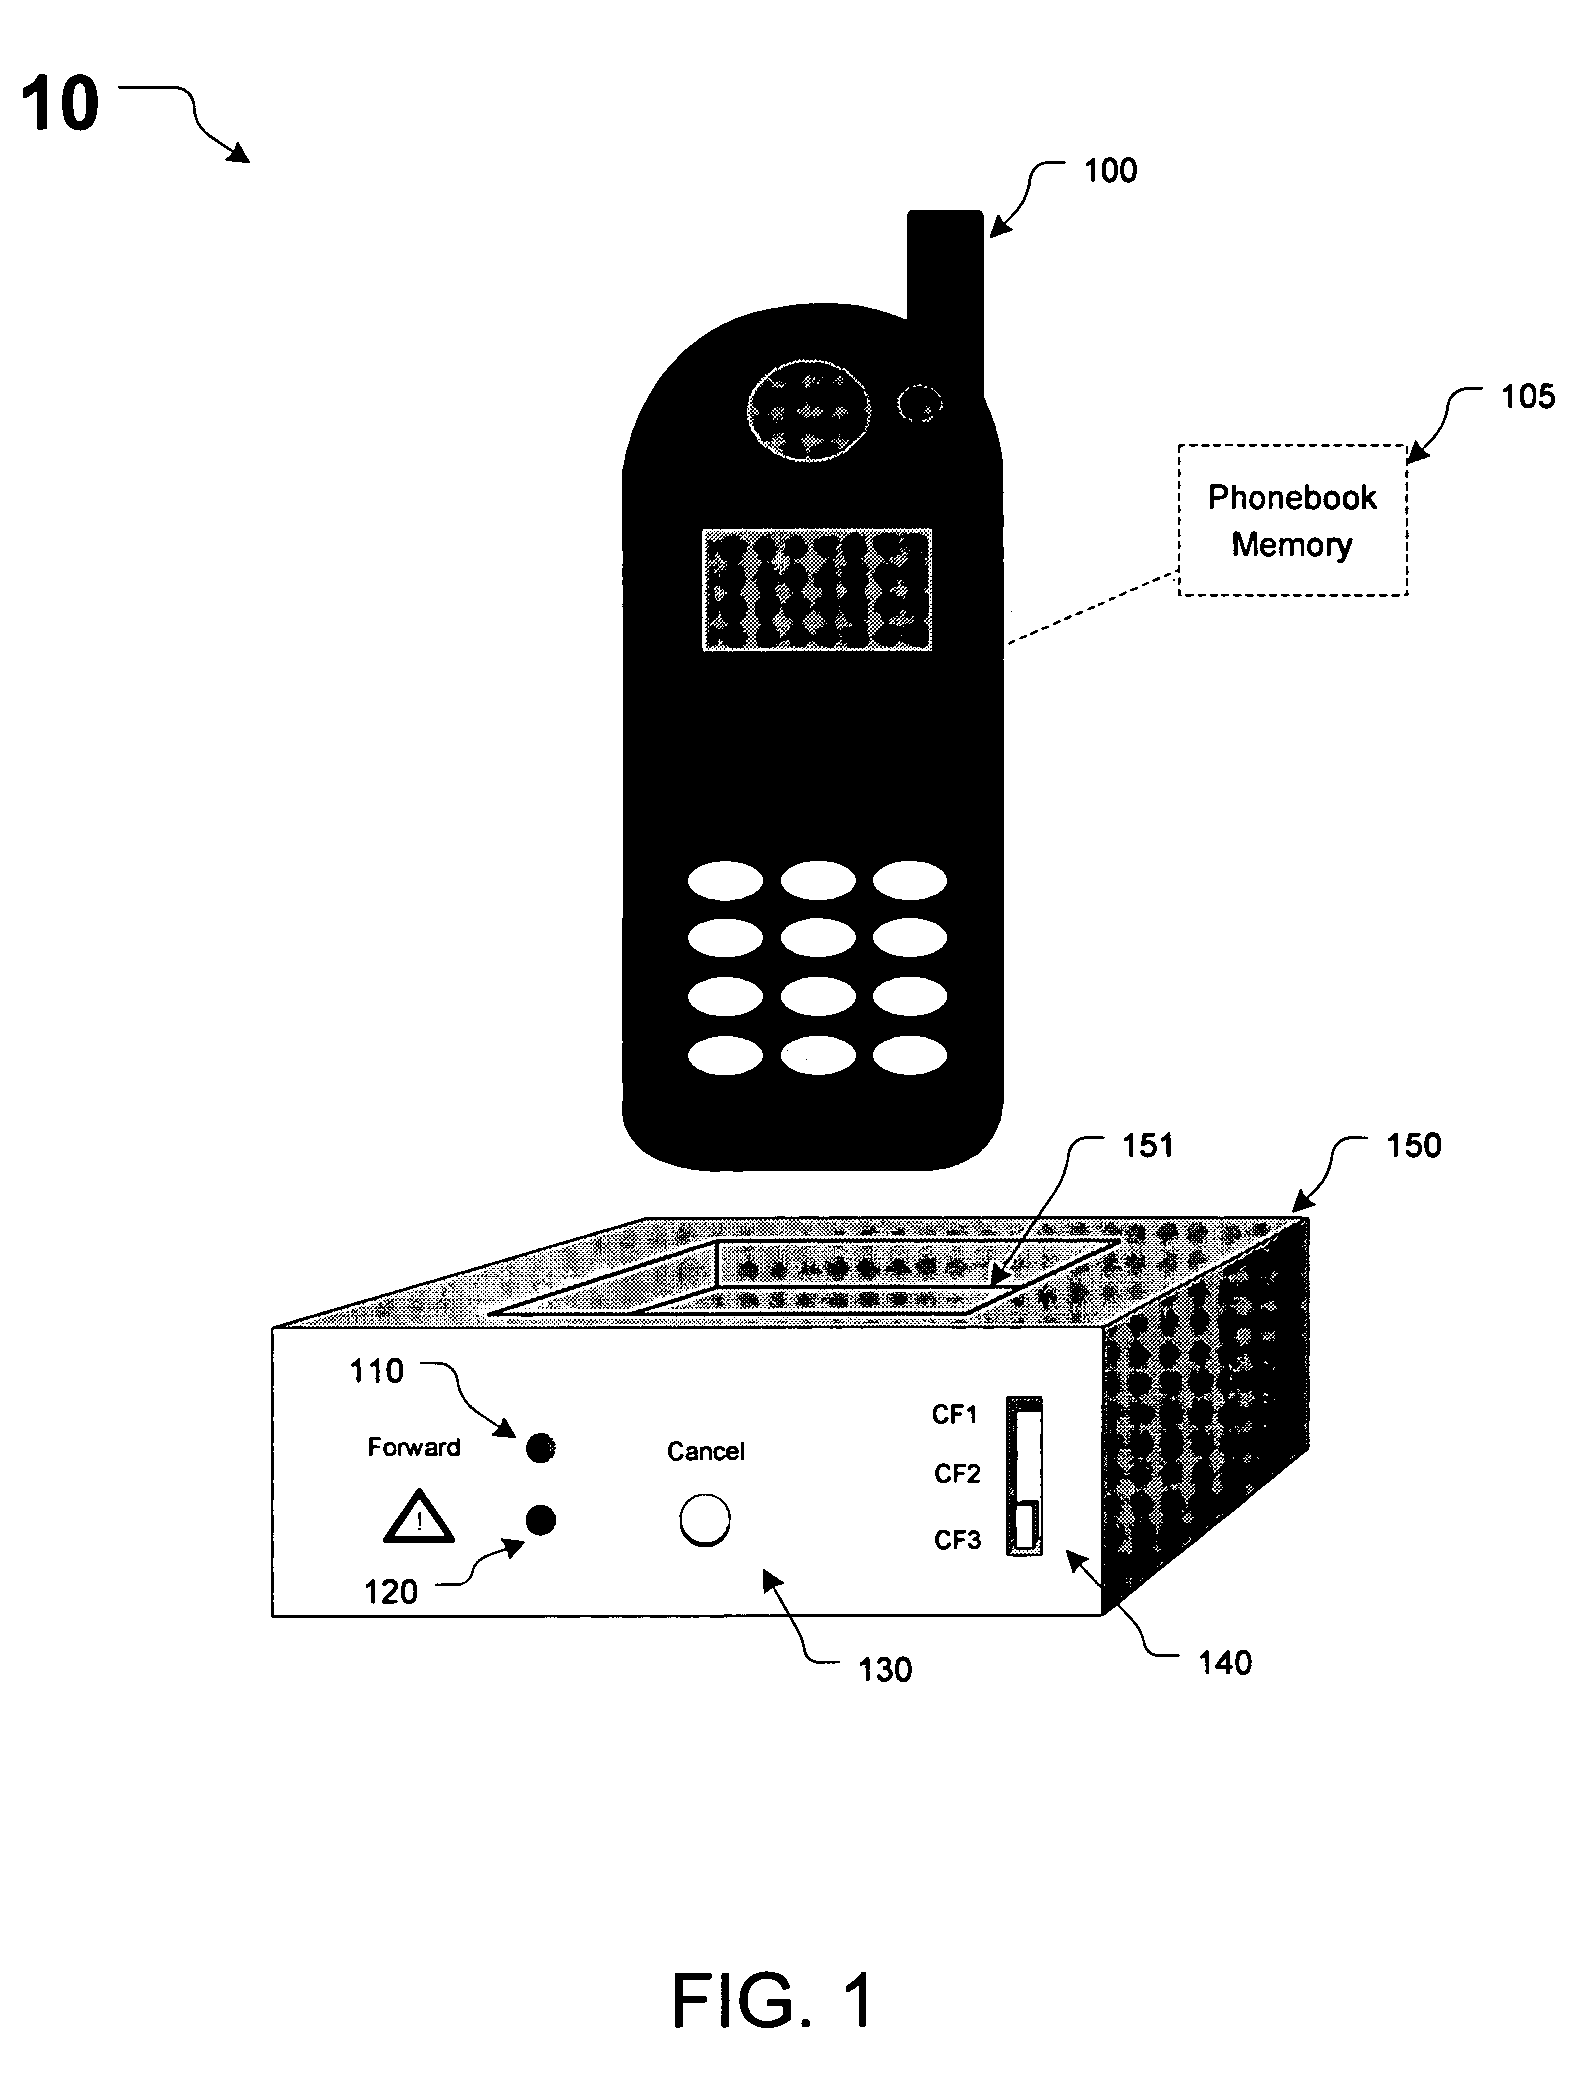 Systems and methods for automatic call forwarding in a wireless mobile station